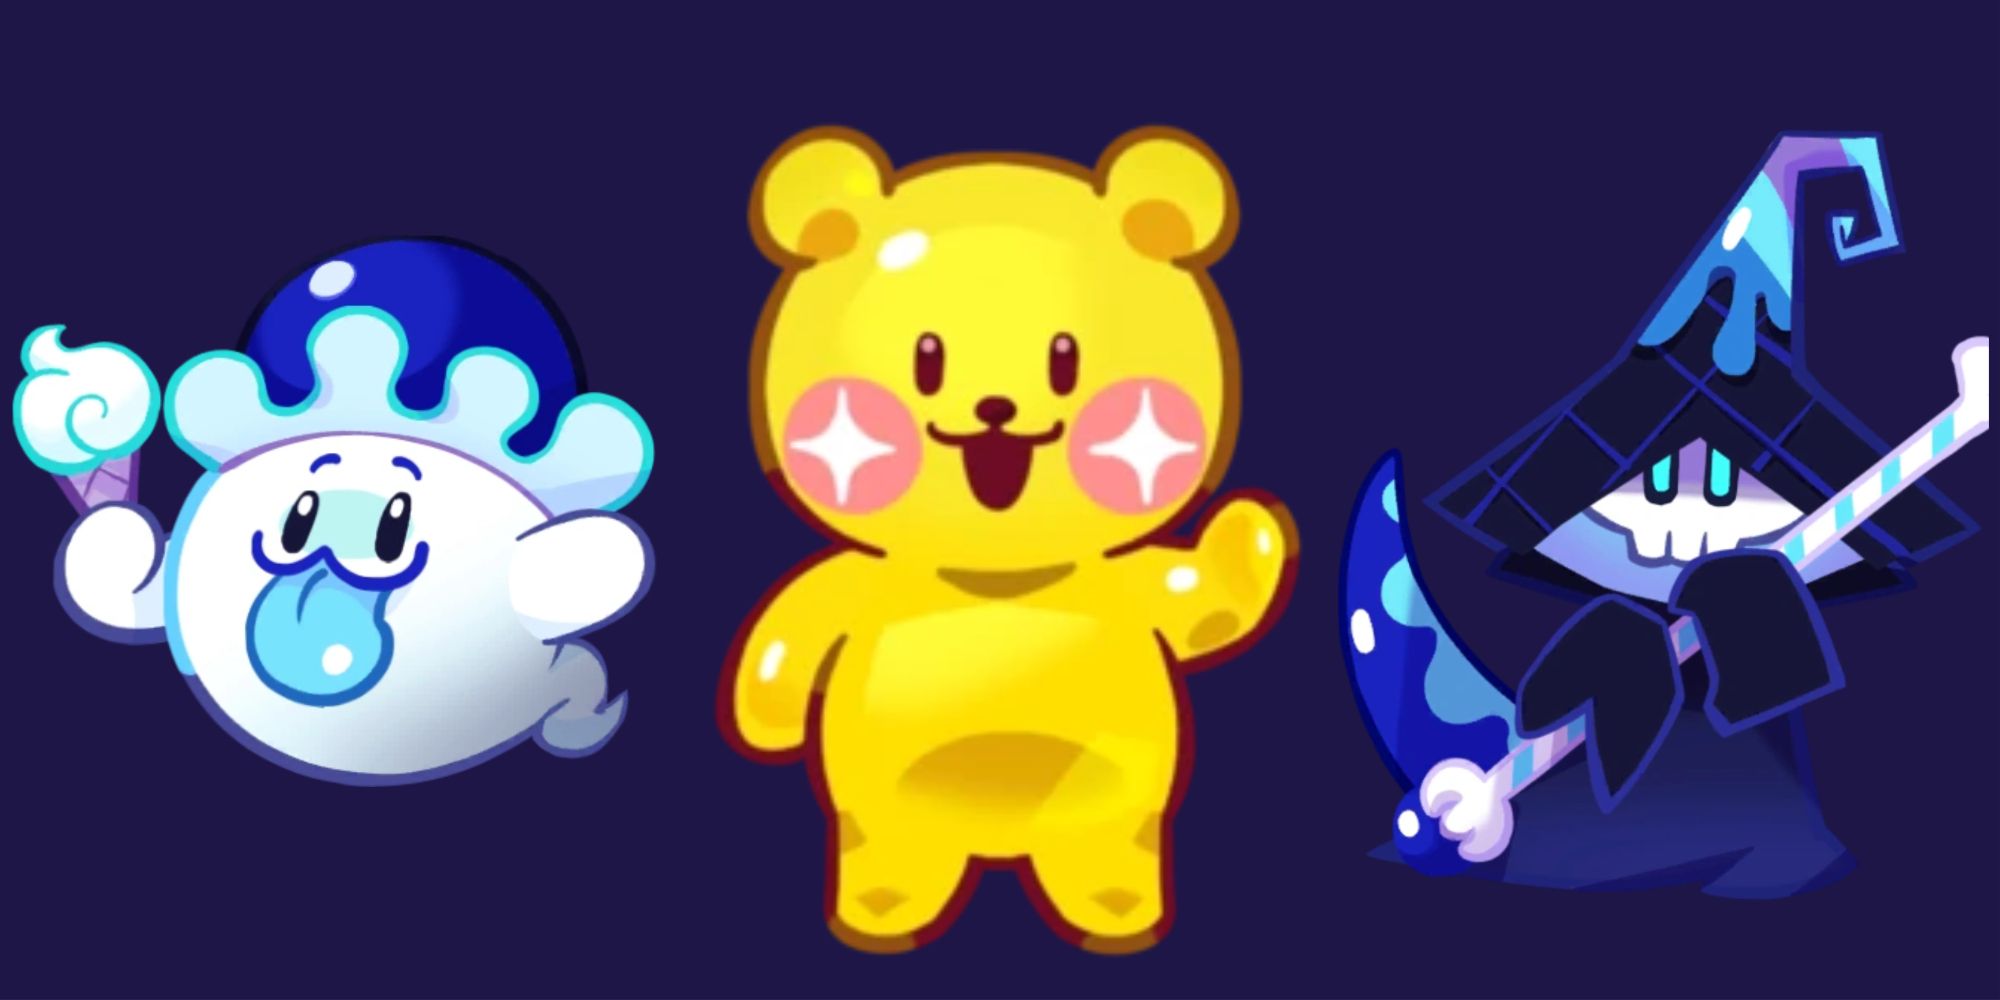 Ice cream ghost, bear jelly, and the ferryman in Cookie Run: Kingdom